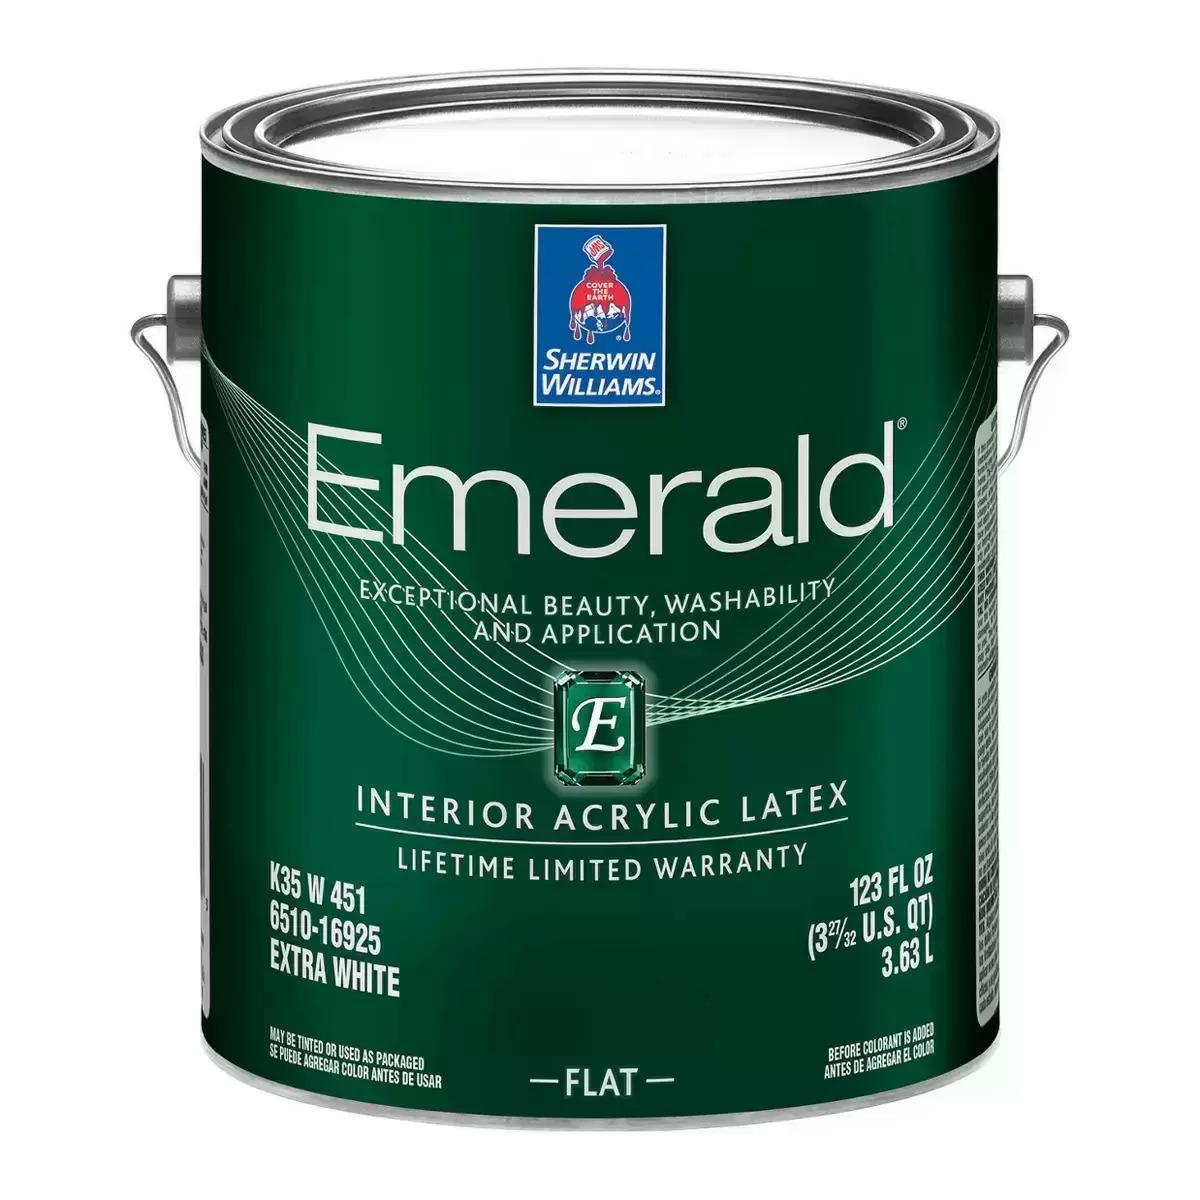 Sherwin Williams Emerald Paint Products 40% Off